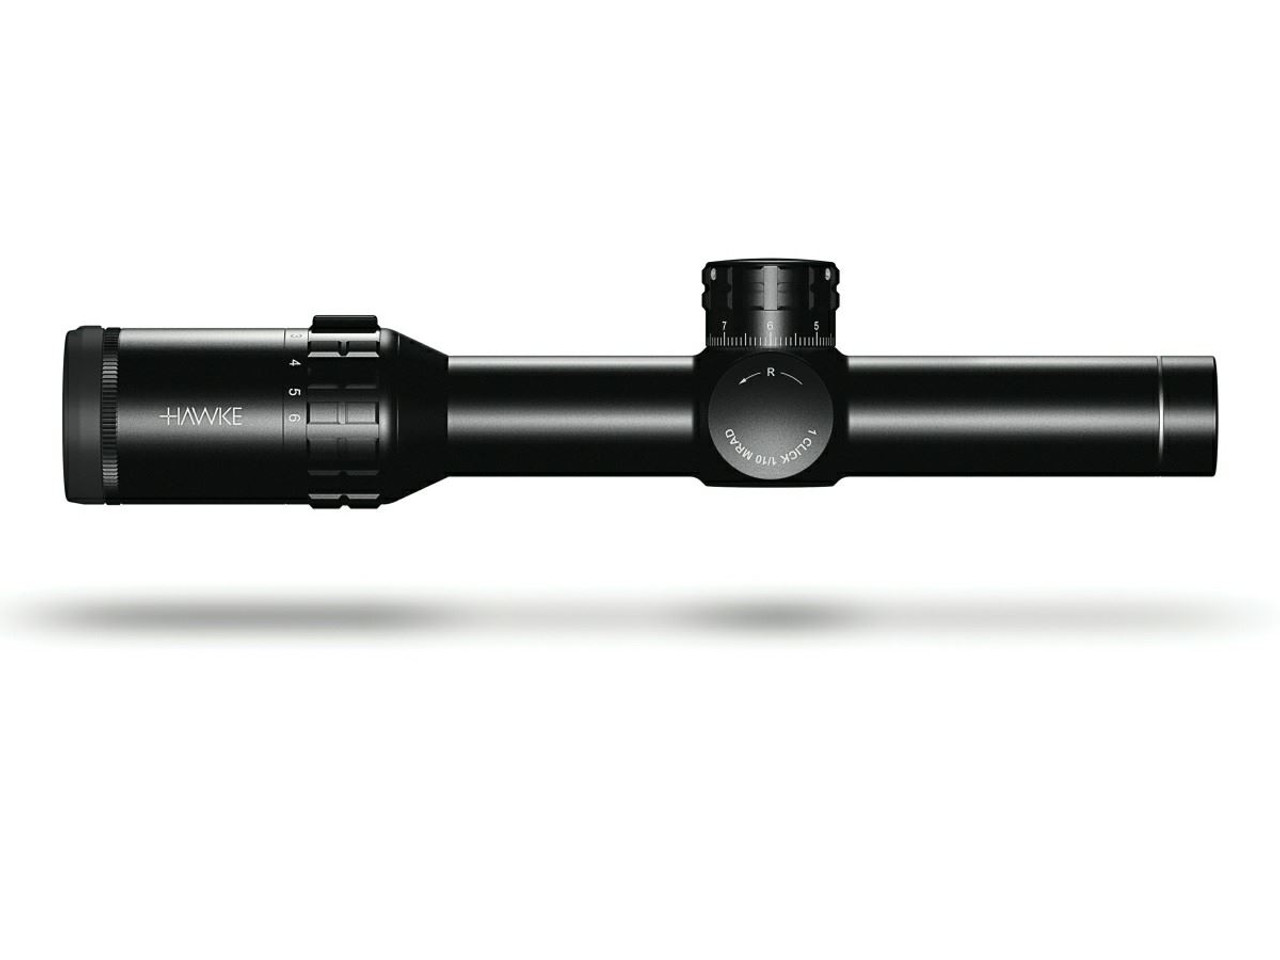 Hawke Frontier 30 1-6x24 Rifle Scope Tactical Dot